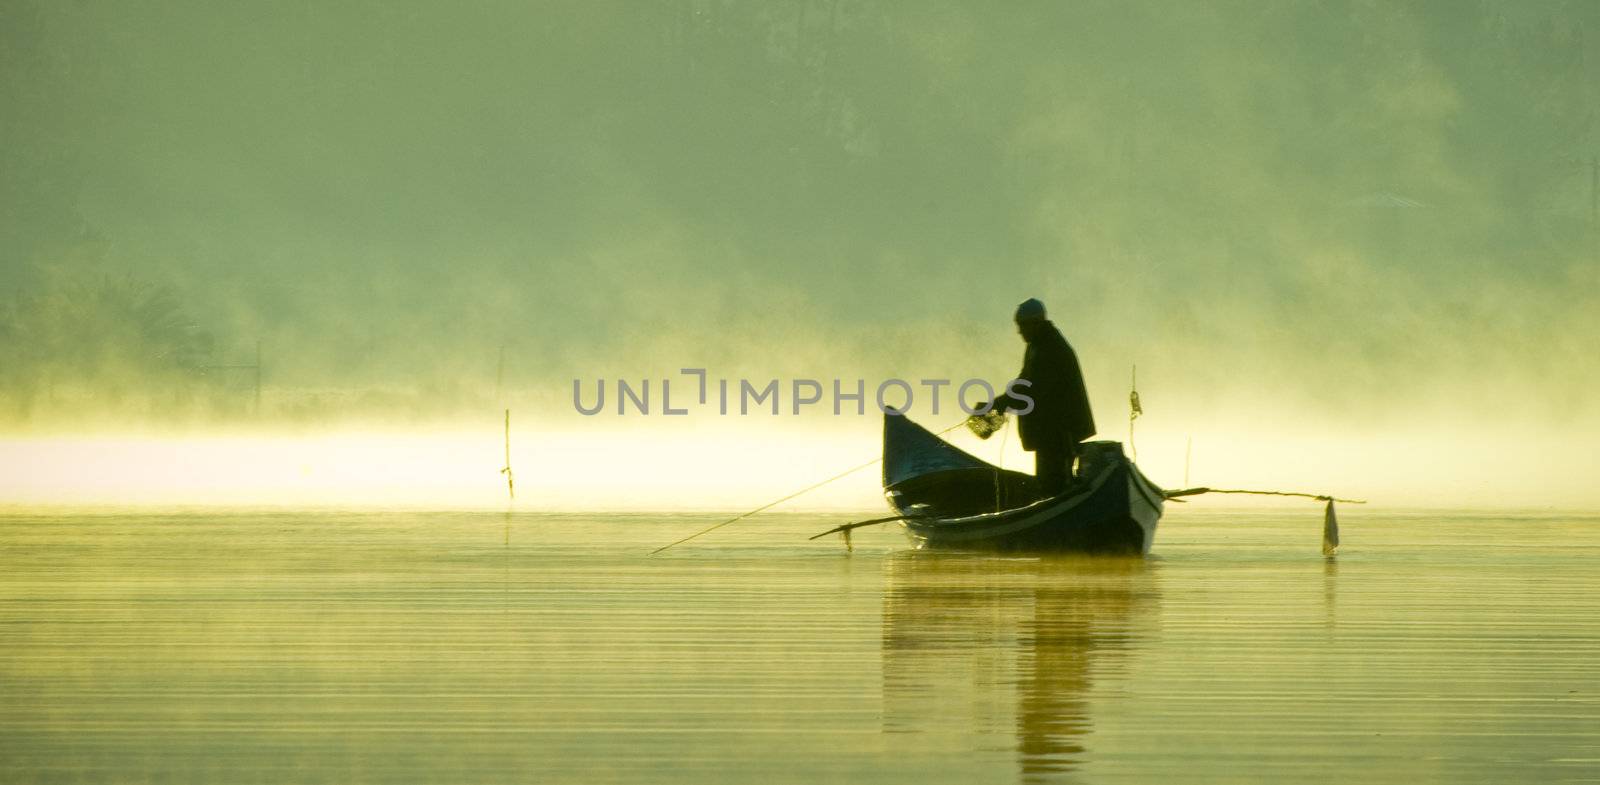 Landscape of a lake with the silhouette of a boat and a fisherman.